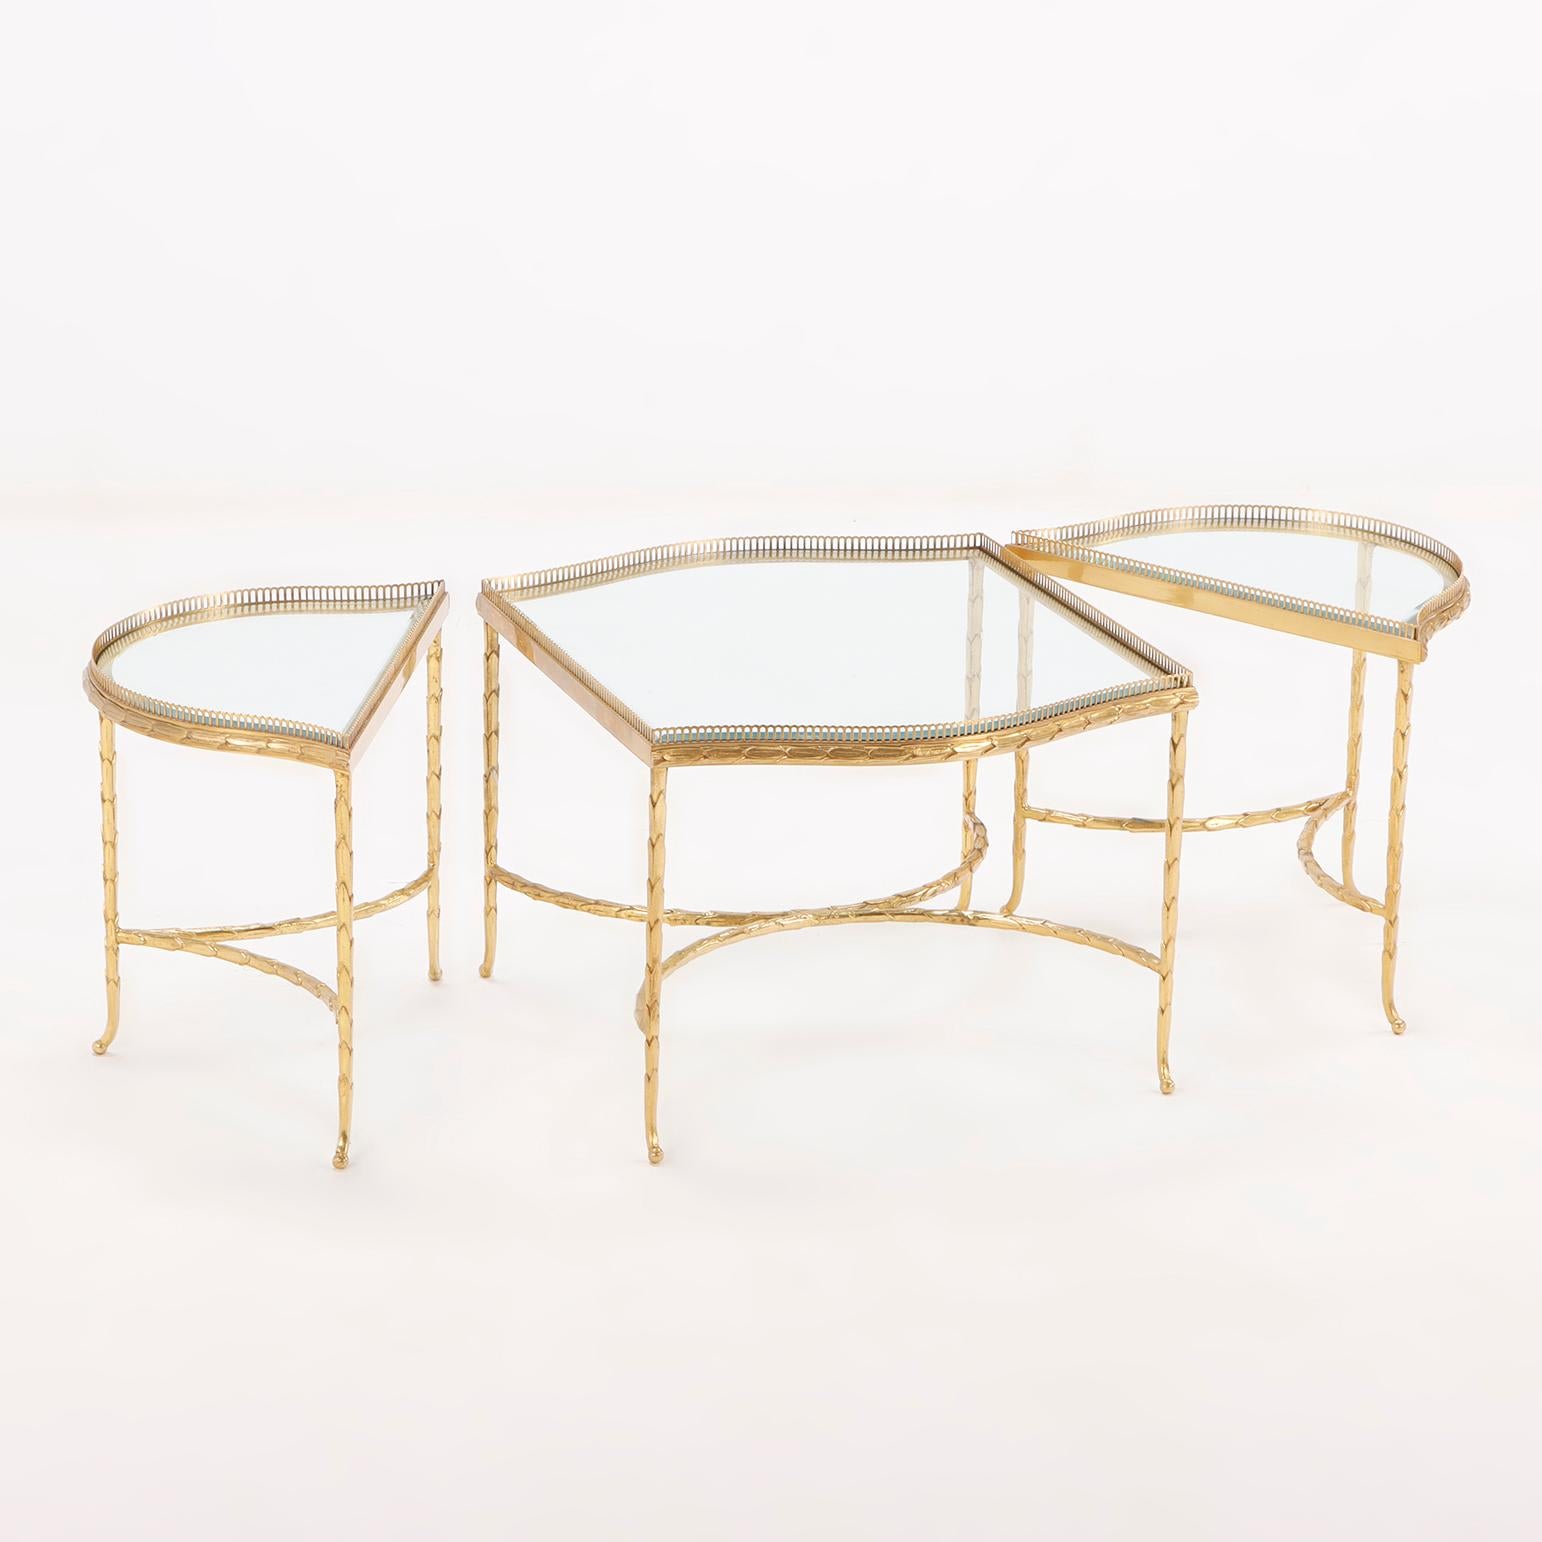 A French three-Part Gilt bronze and Glass Coffee Table attributed to Bagues C 1965.